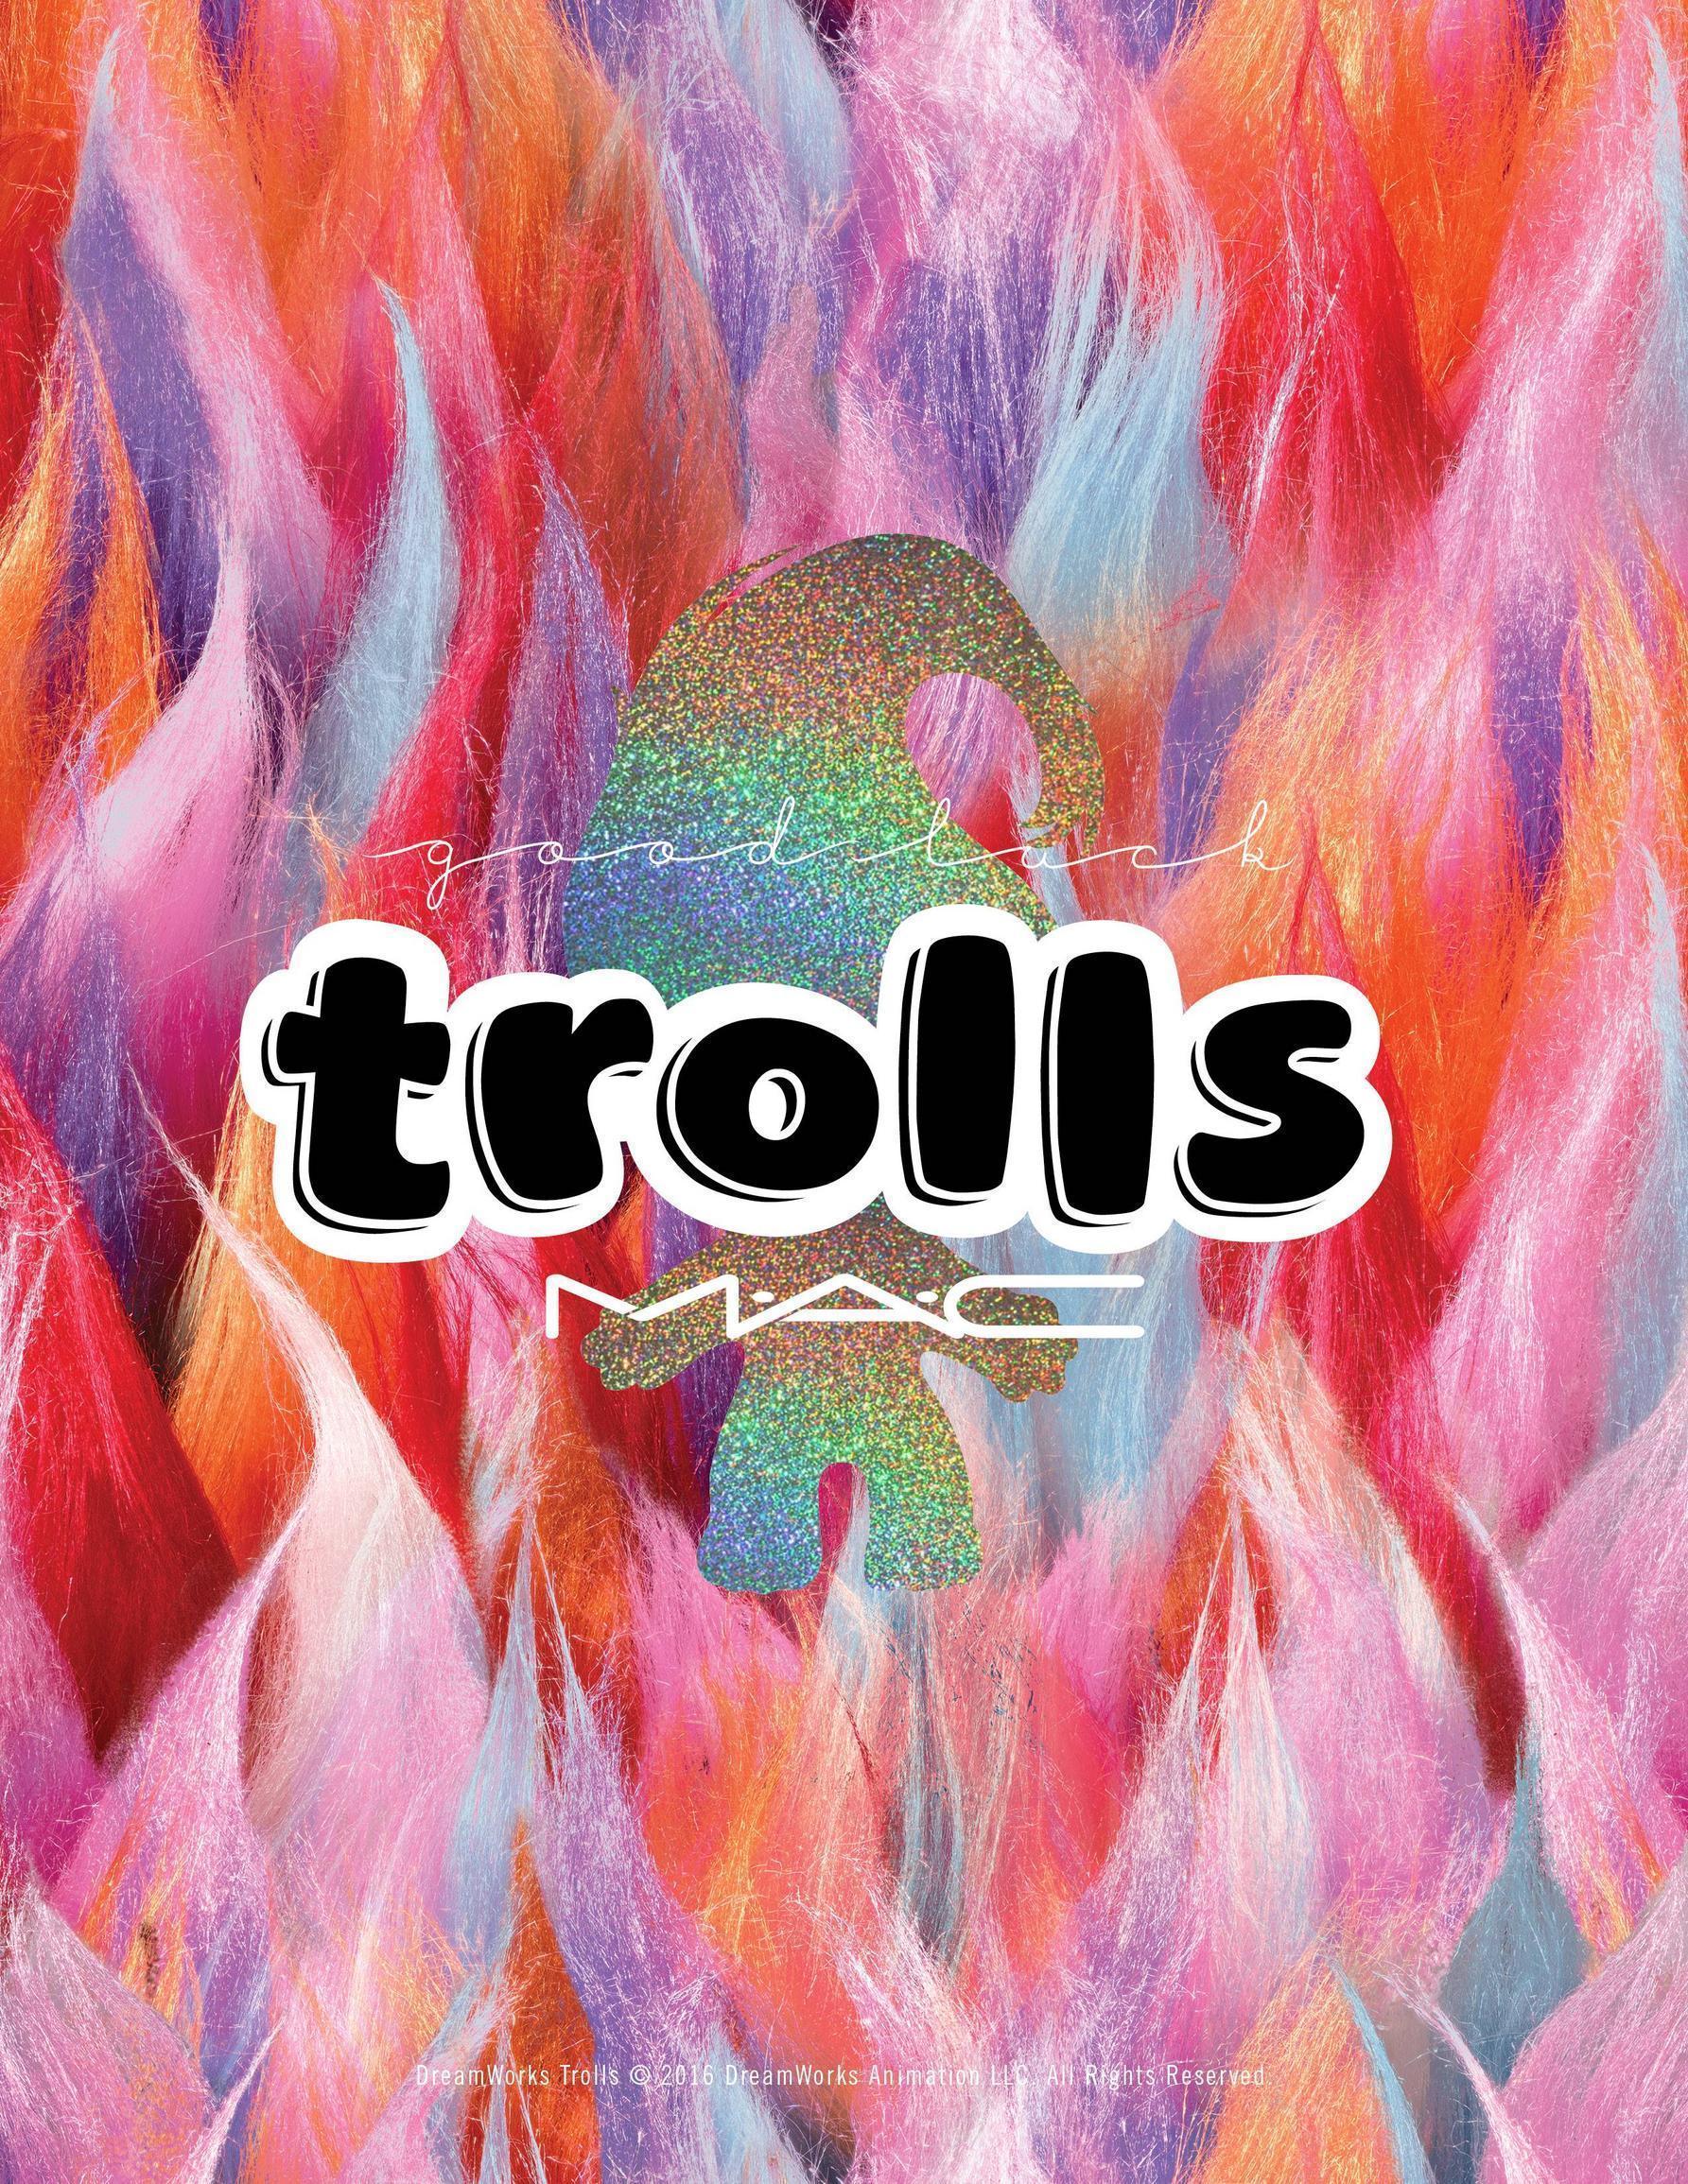 Trolls wallpaper HD background download Mobile iPhone 6s galaxy